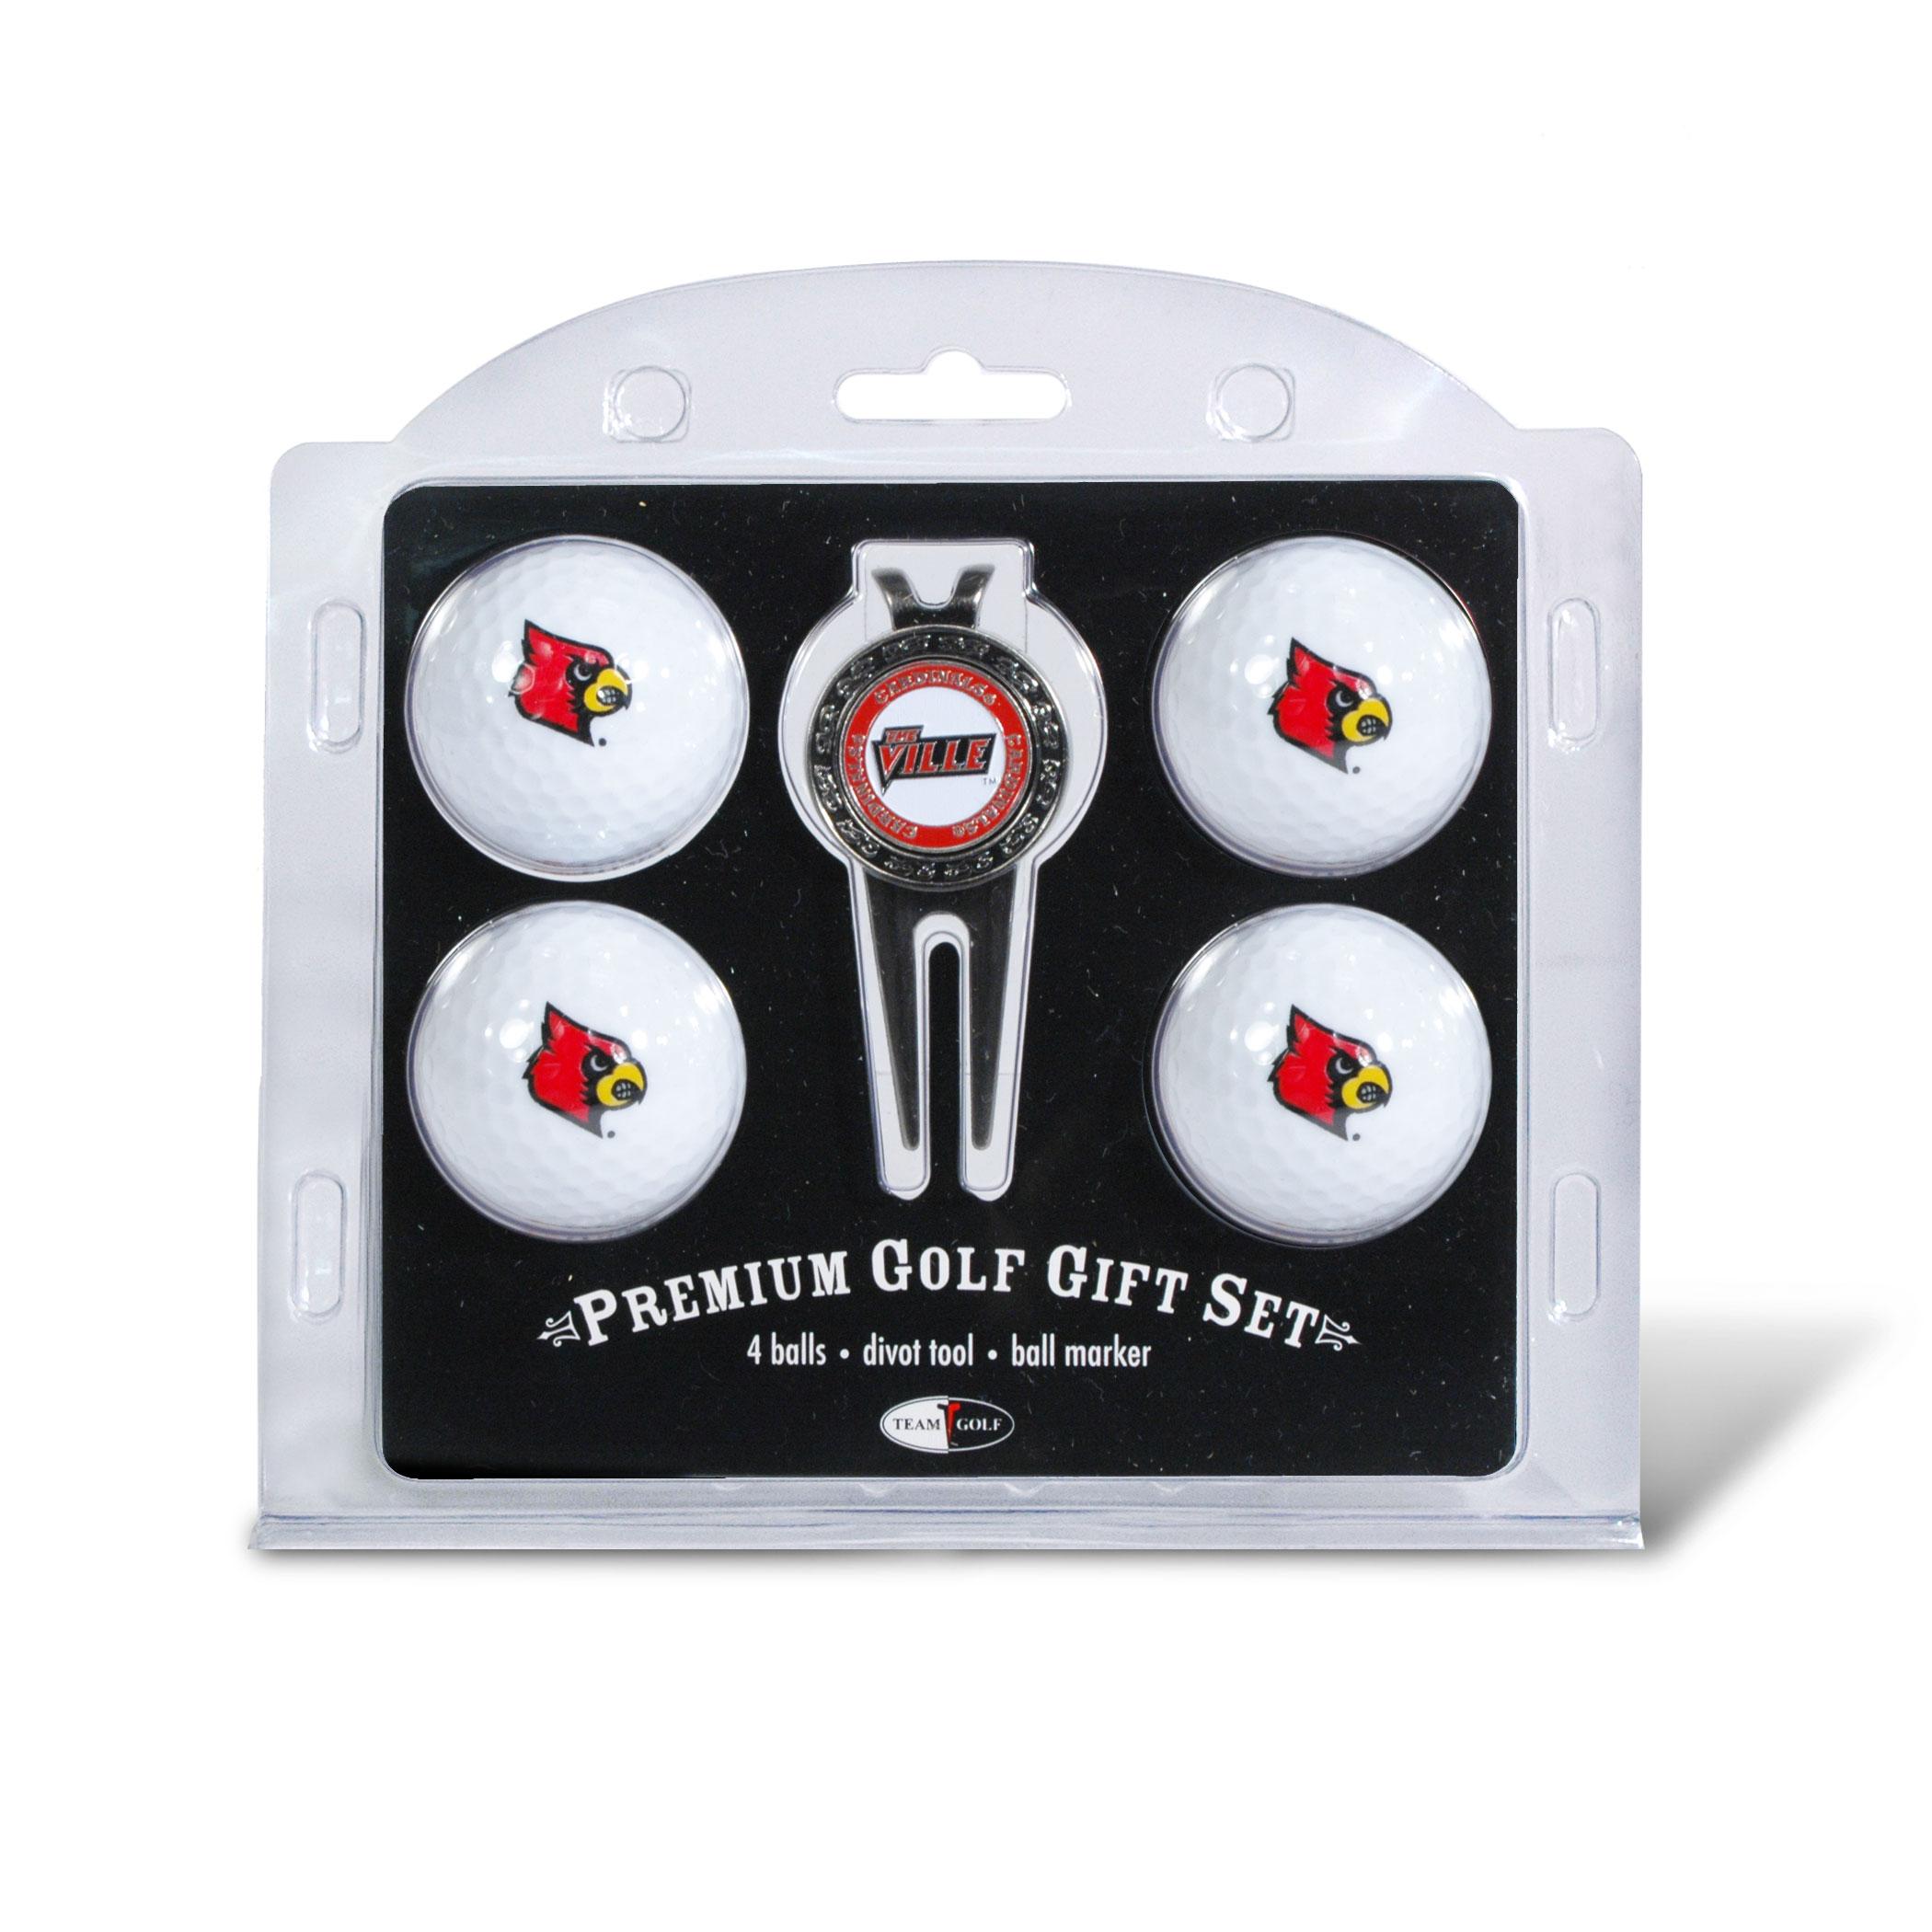 Louisville Cardinals Golf Ball Gift Pack with Key Chain - Sports